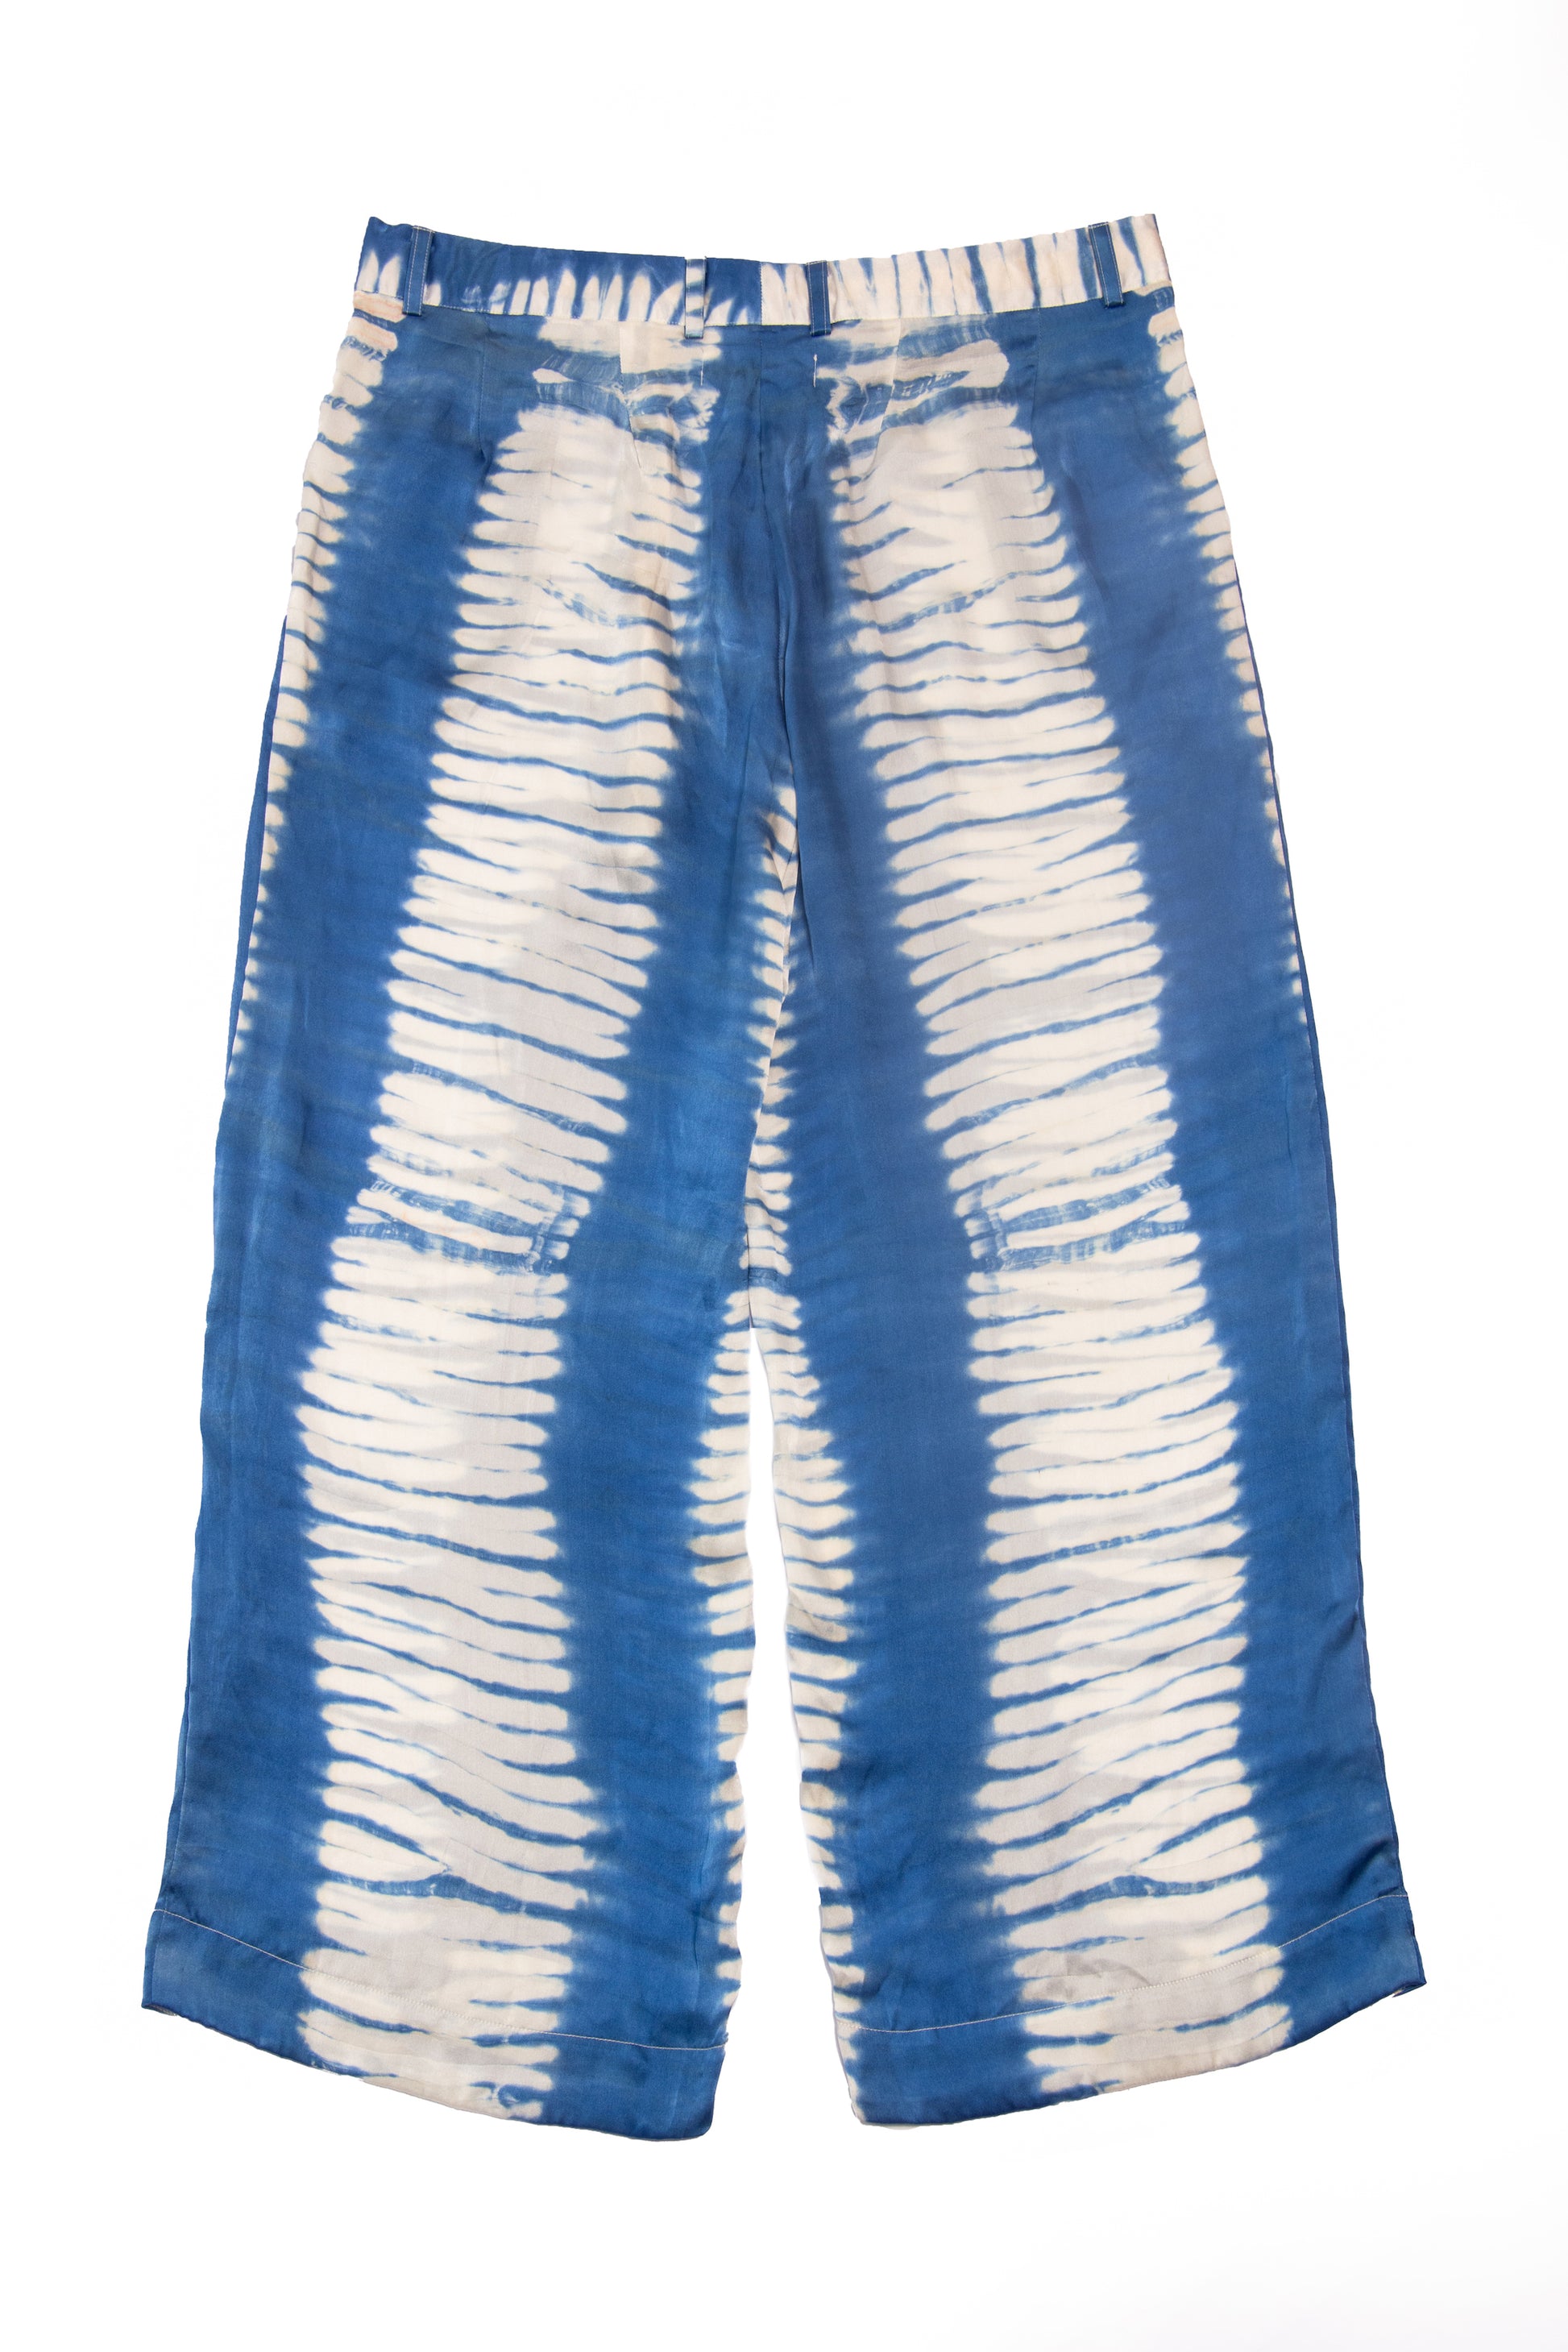 Unisex statement silk tie dye hand made pants made in Indonesia Designed in Australia